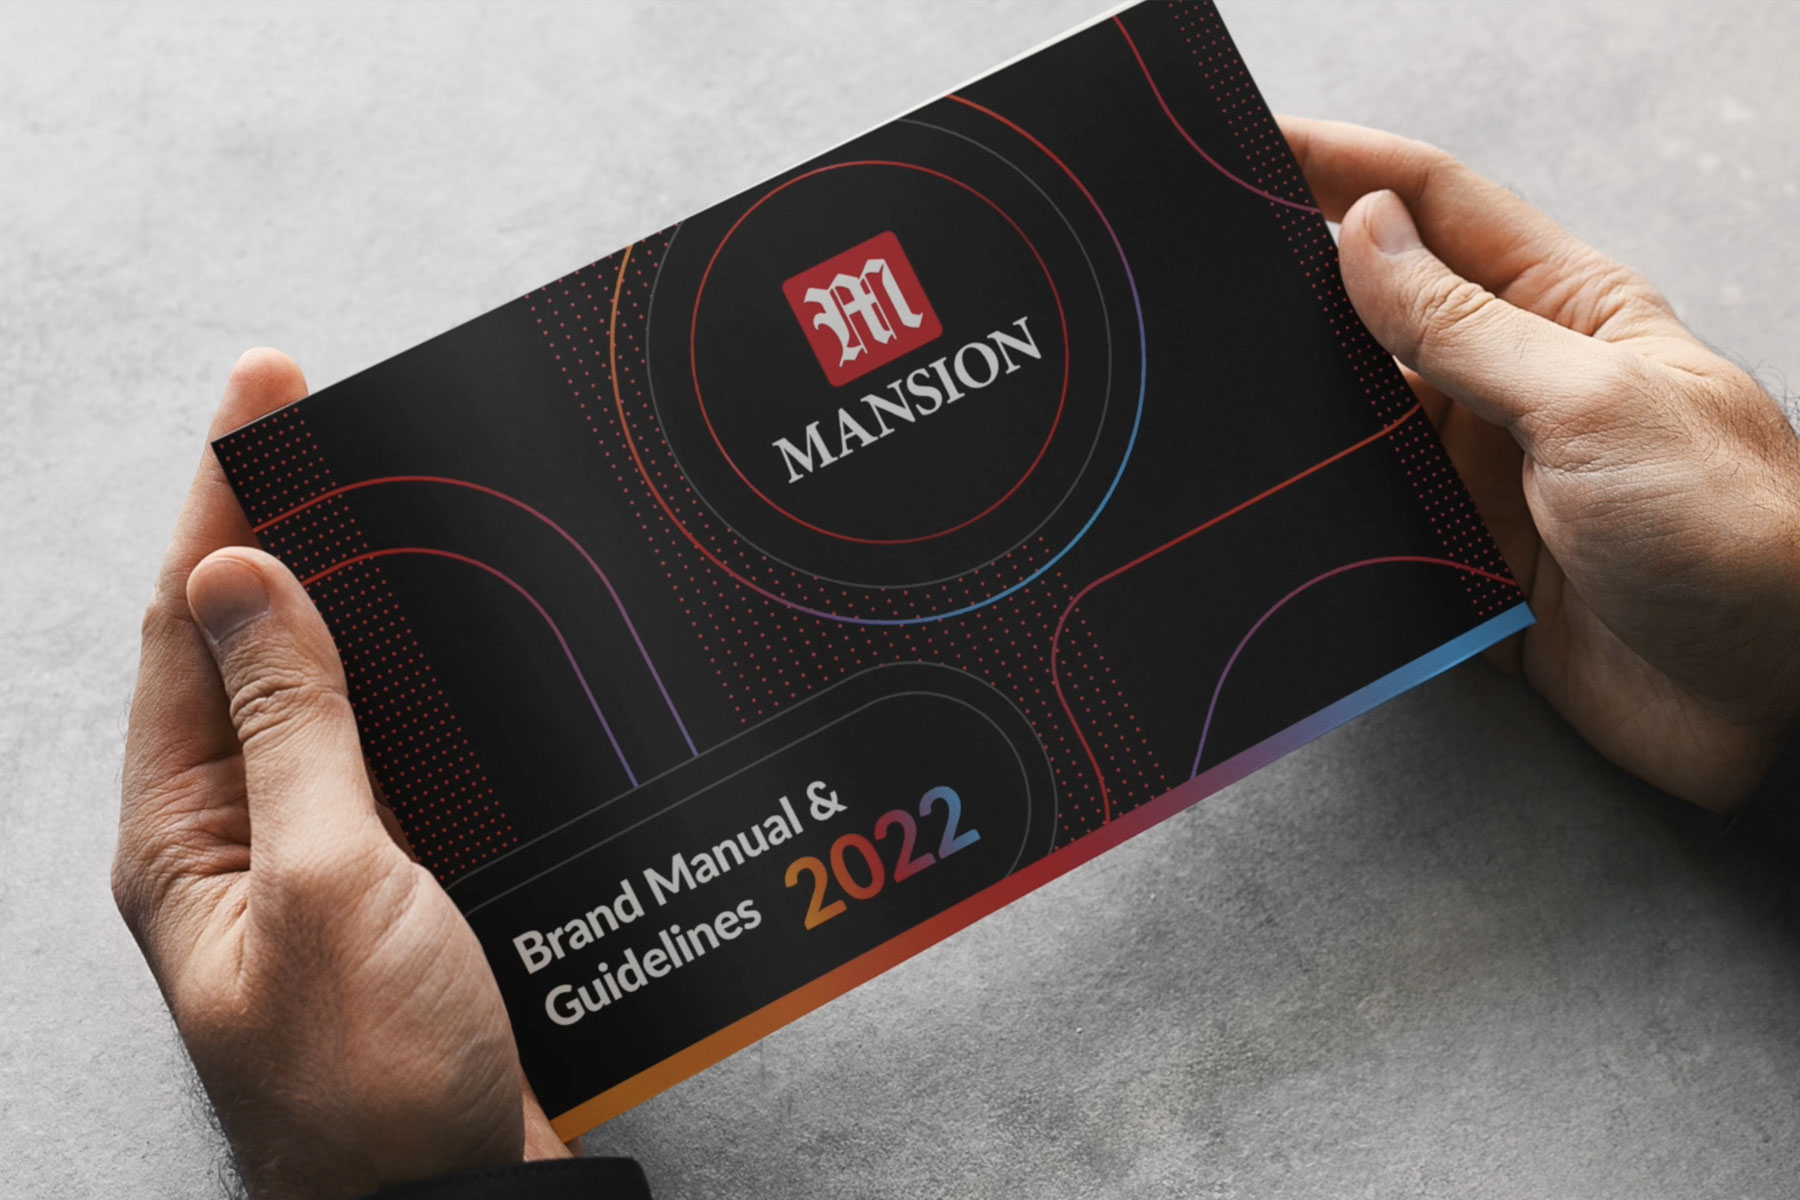 Mansion Group New Branding Guidelines